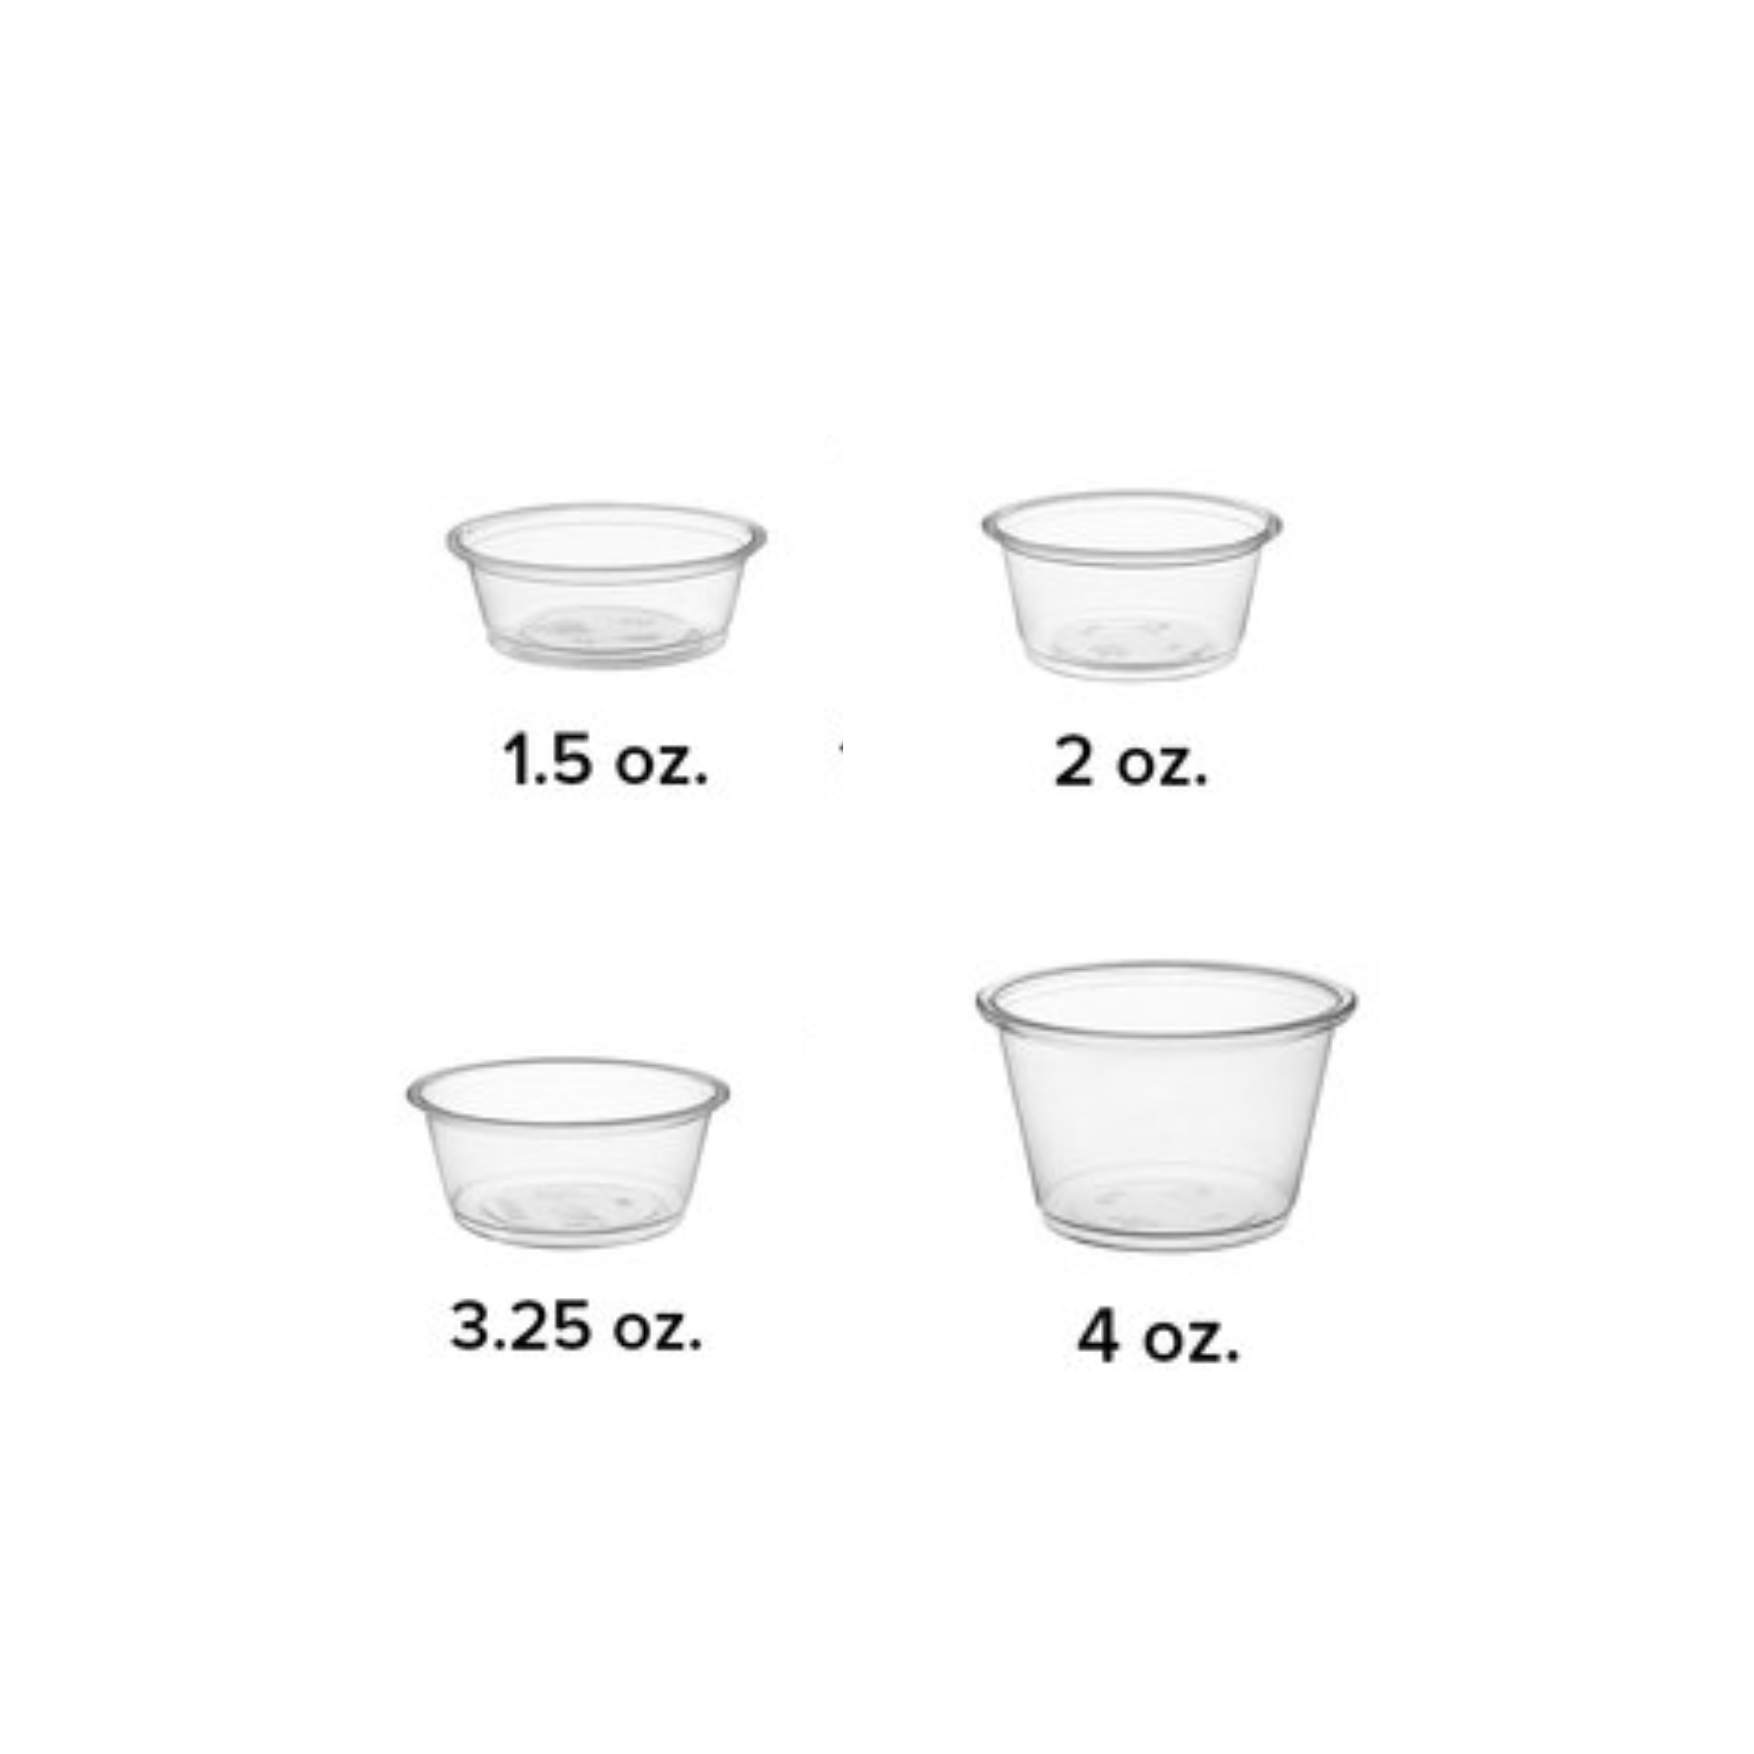 Sizes of portion cups